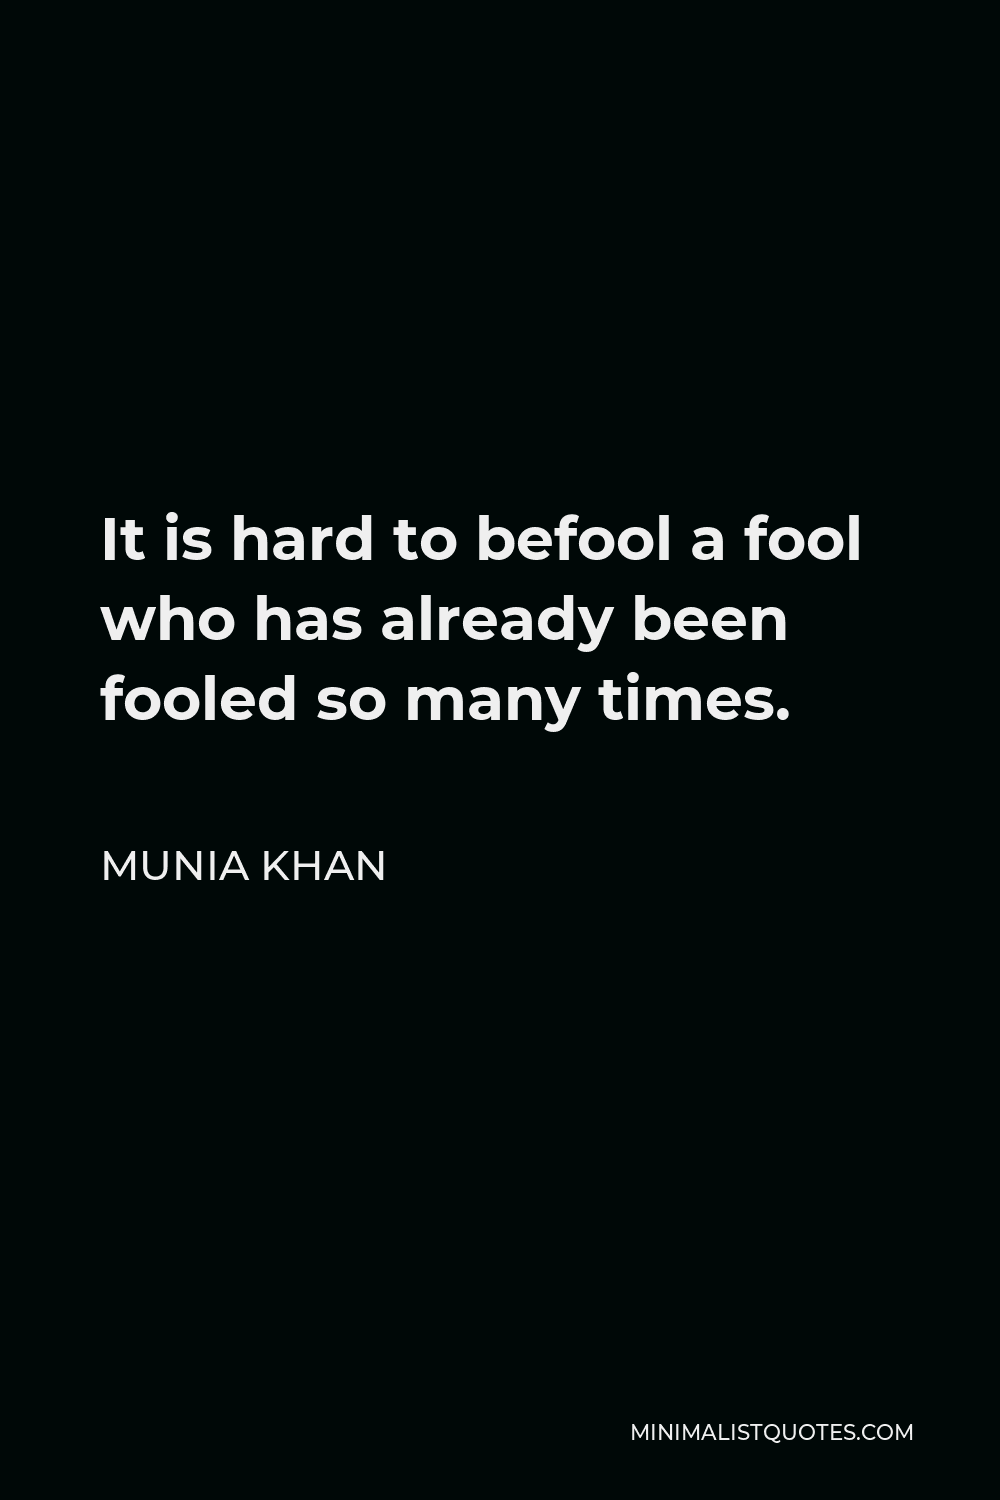 Munia Khan Quote - It is hard to befool a fool who has already been fooled so many times.